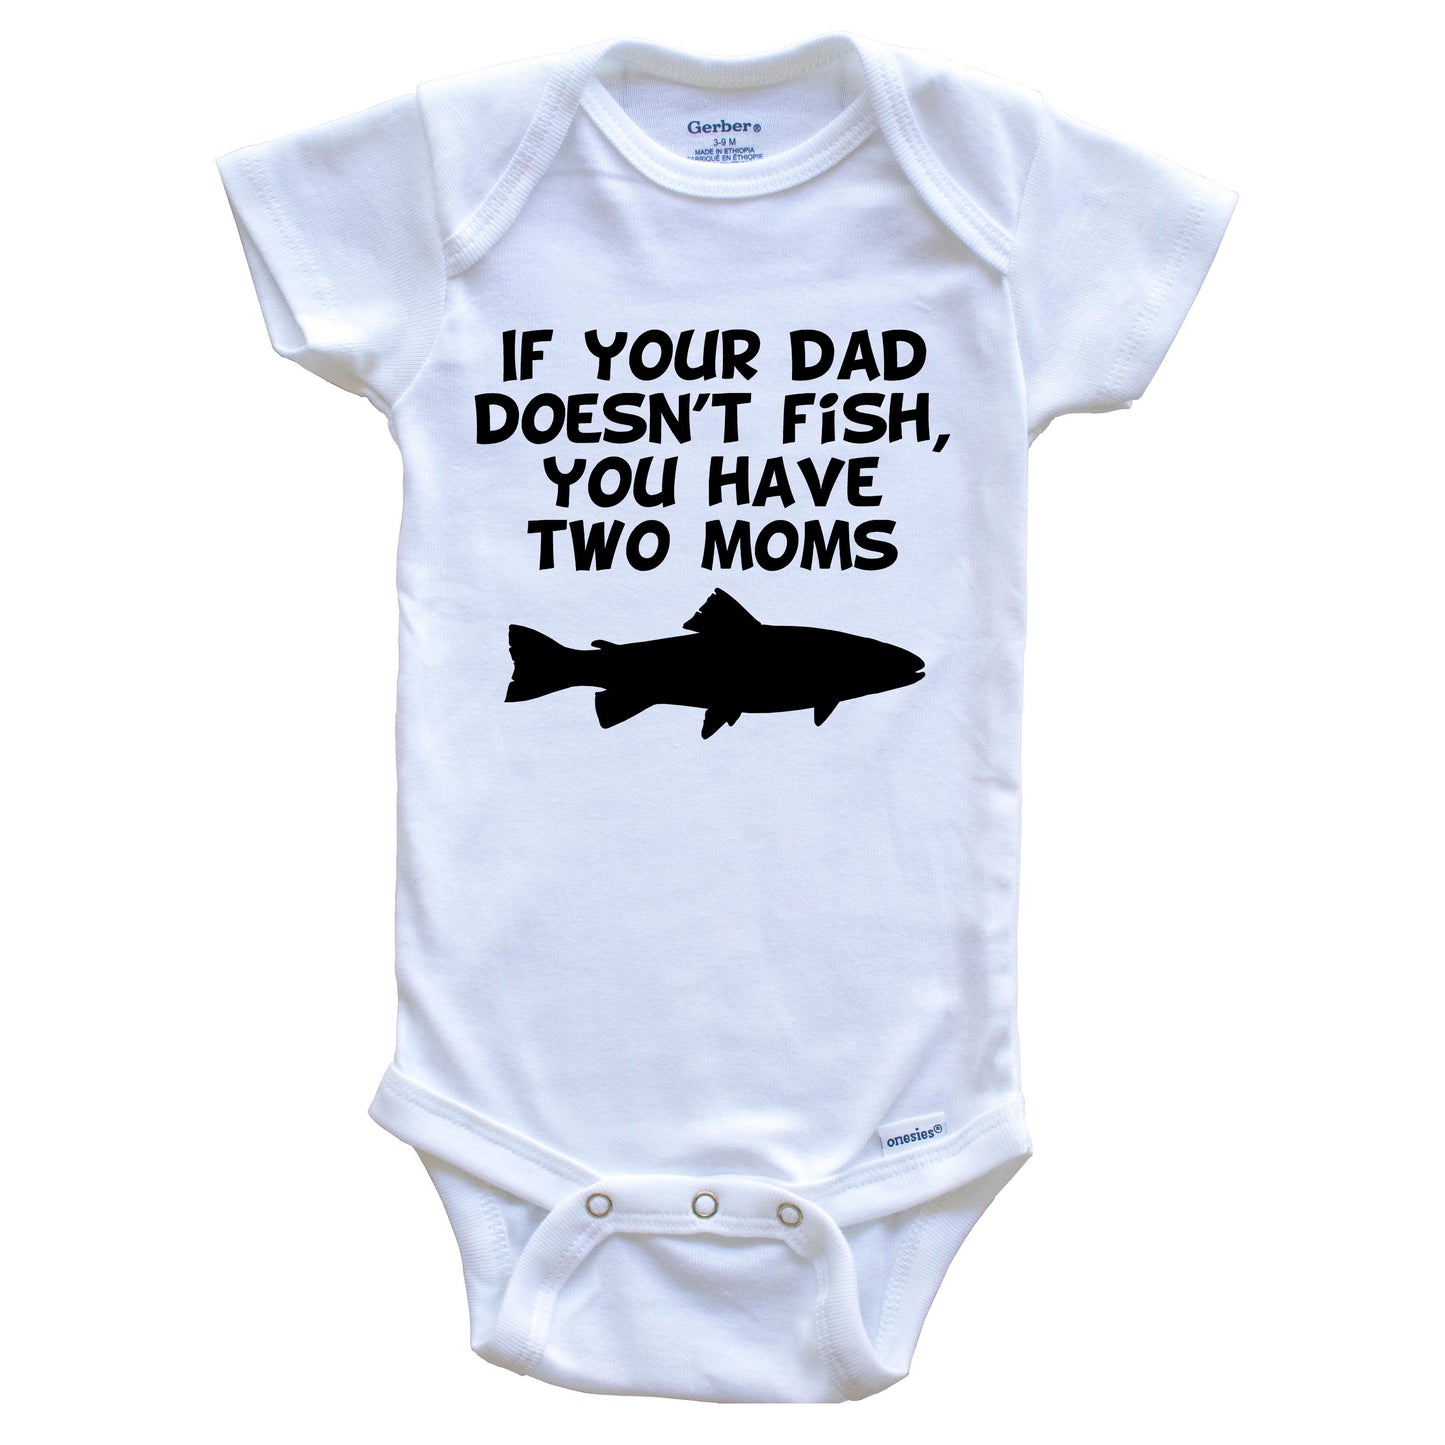 If Your Dad Doesn't Fish You Have Two Moms Funny Fishing Baby Onesie 24 Months / White